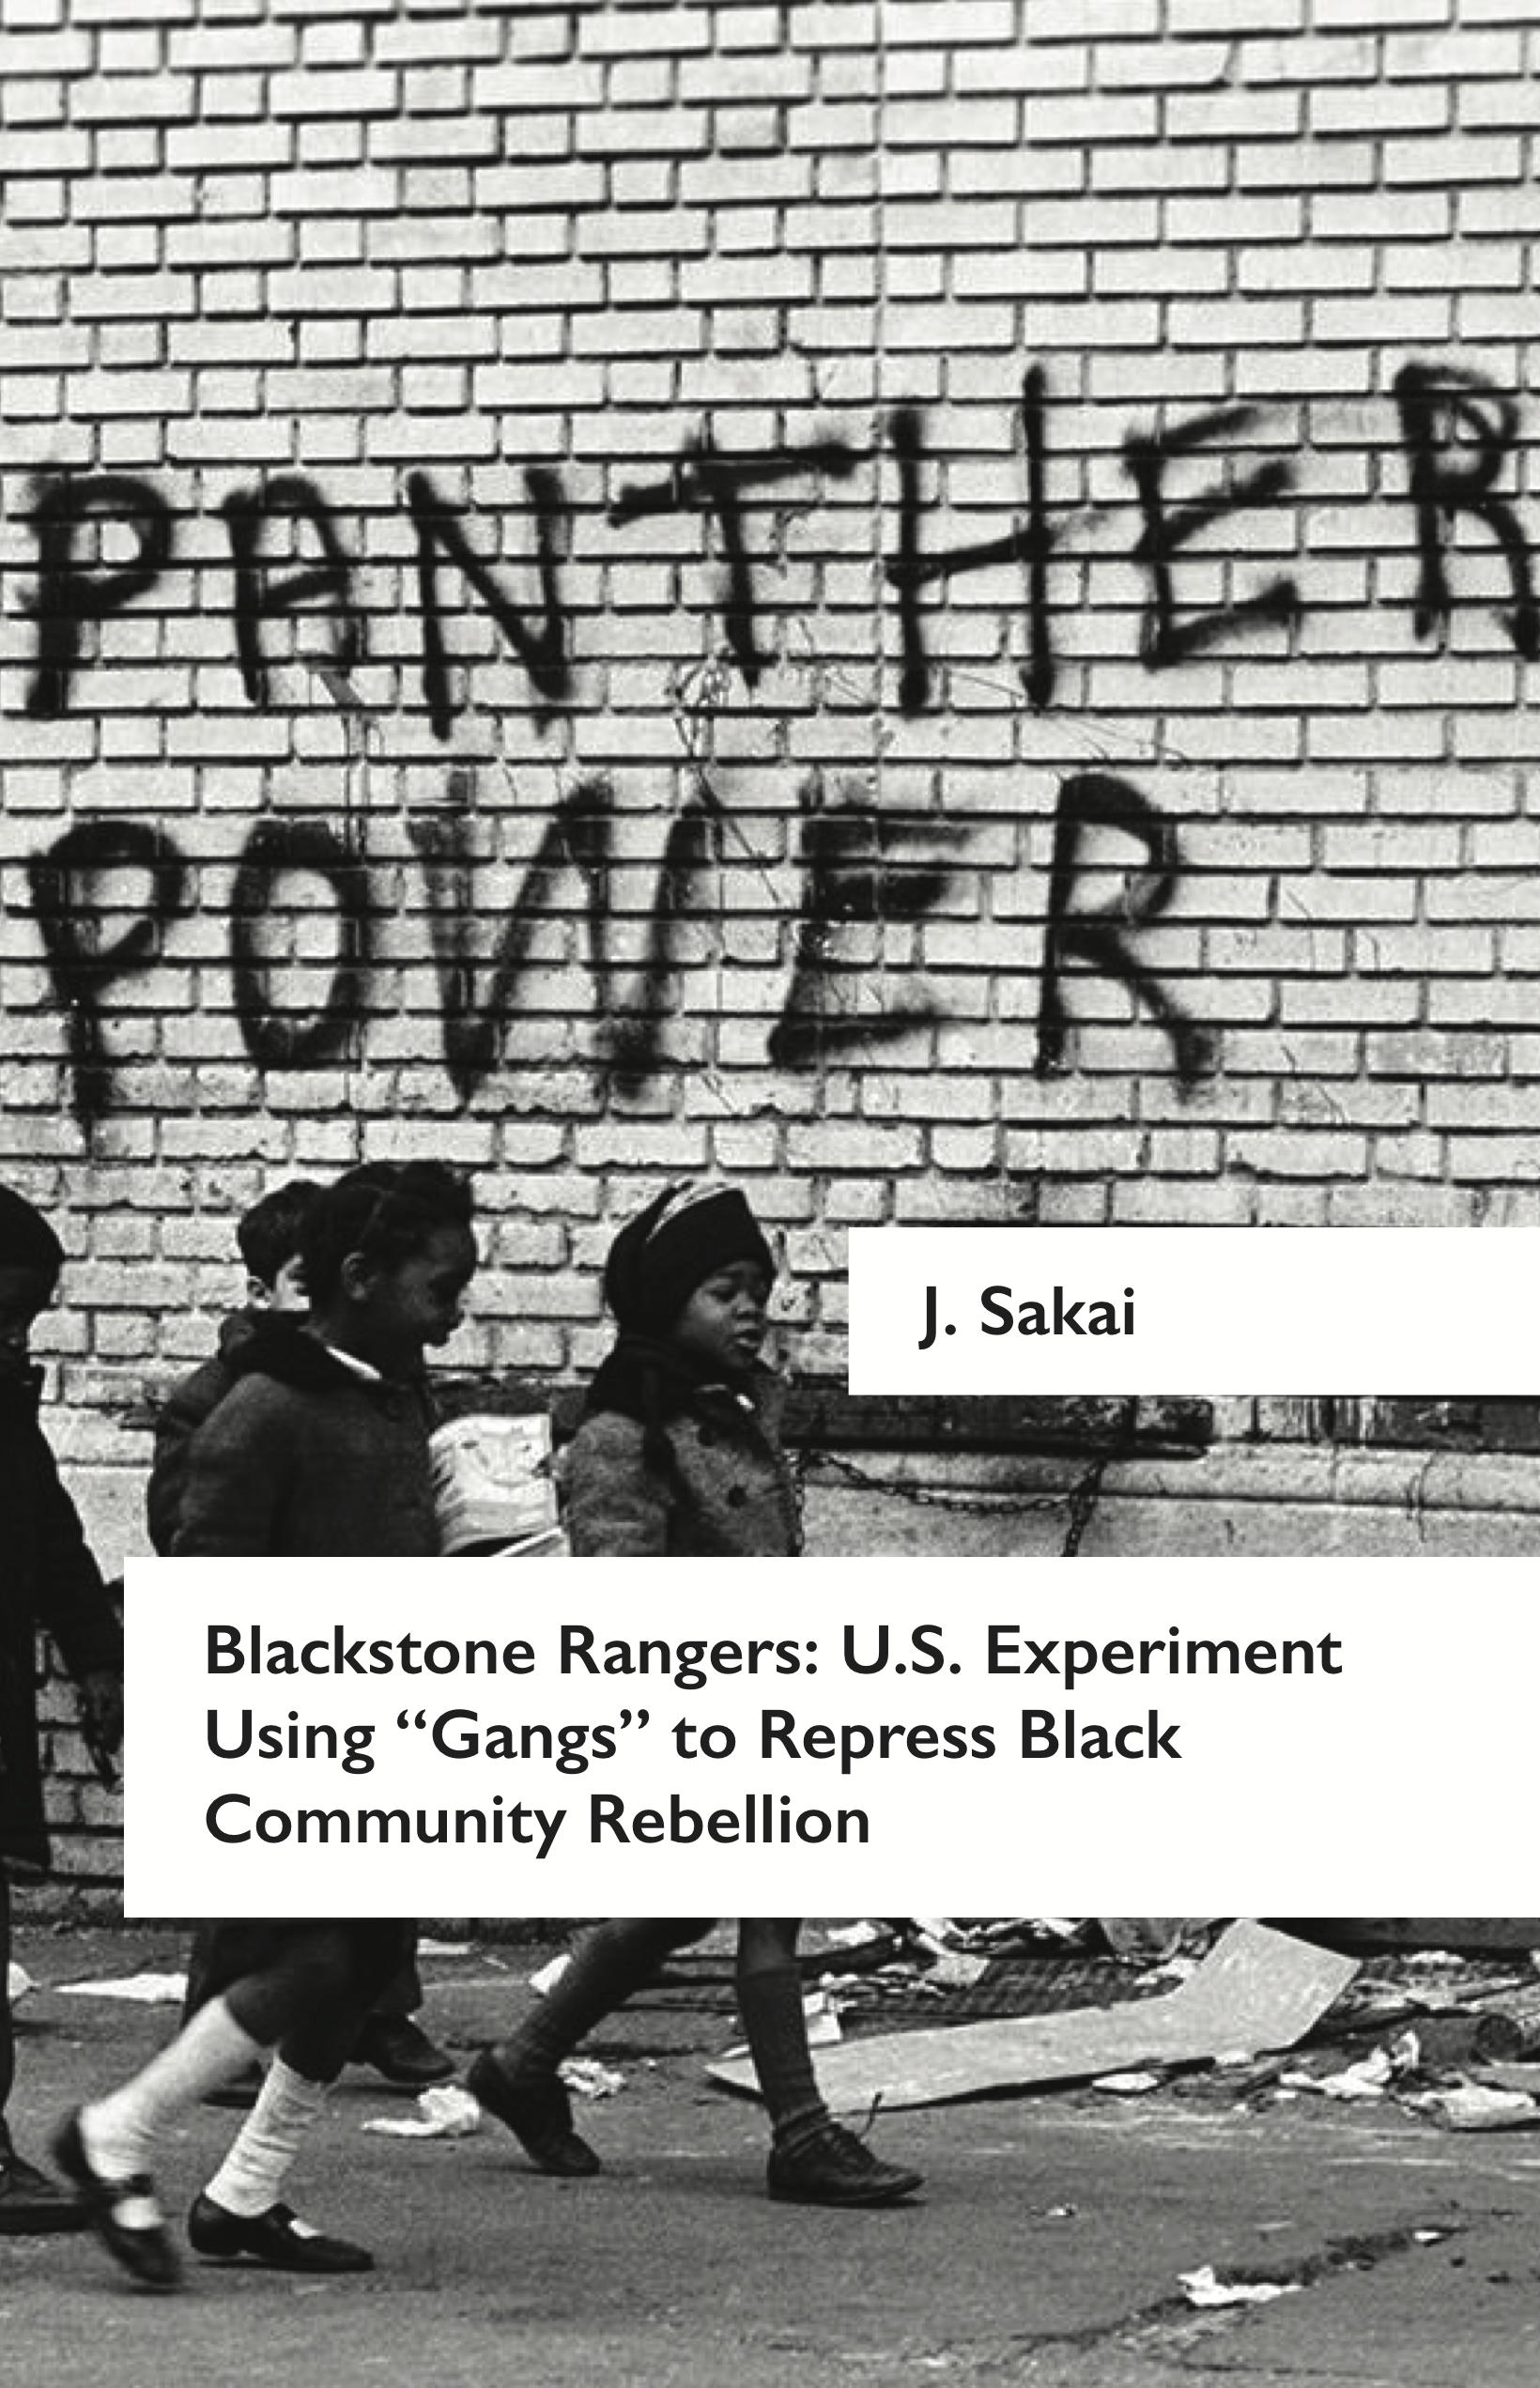 Cover Image for Blackstone Rangers: A U.S. Experiment Using ‘Gangs’ to Repress Black Community Rebellion